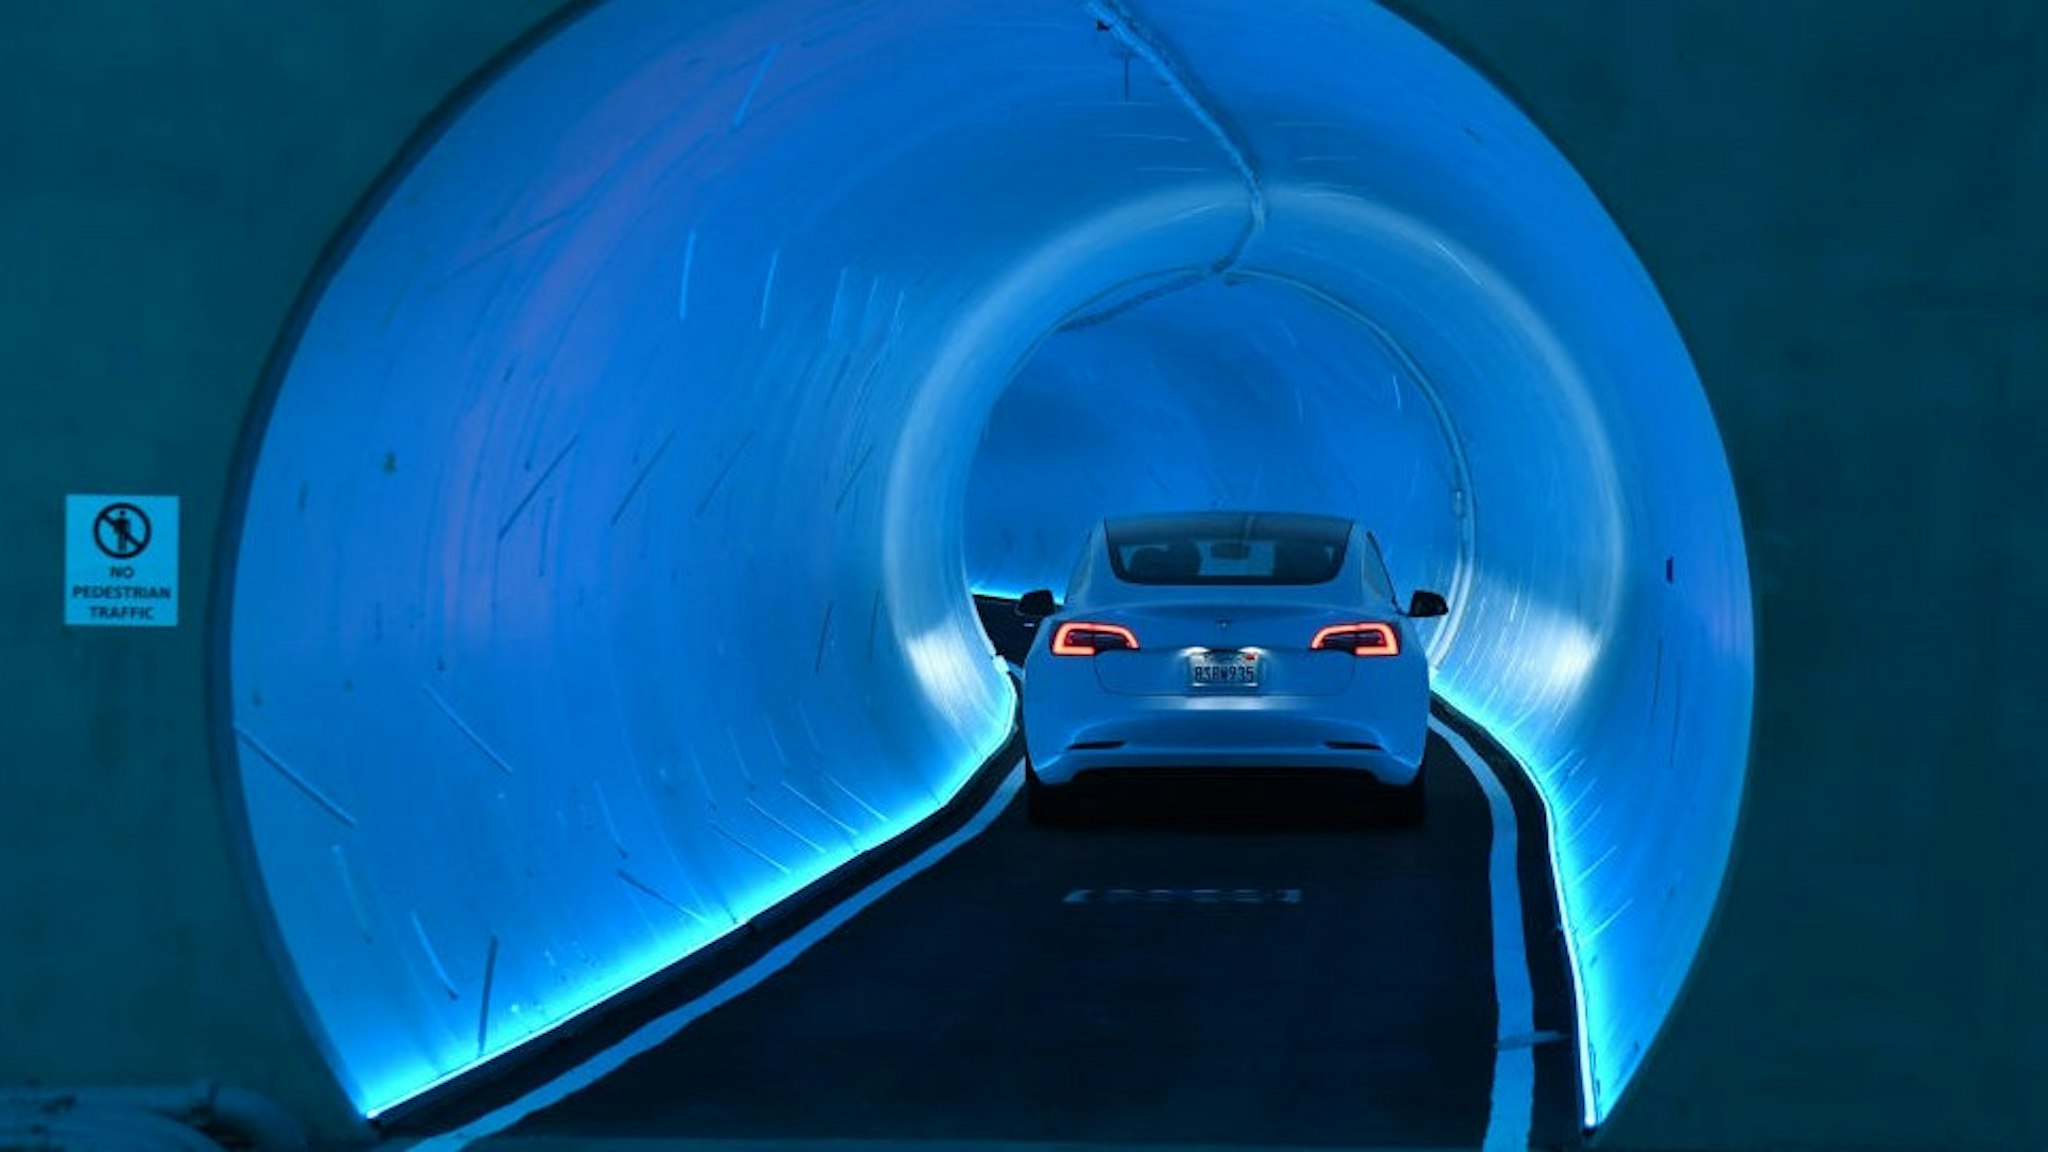 LAS VEGAS, NEVADA - APRIL 09: A Tesla car drives through a tunnel in the Central Station during a media preview of the Las Vegas Convention Center Loop on April 9, 2021 in Las Vegas, Nevada. The Las Vegas Convention Center Loop is an underground transportation system that is the first commercial project by Elon Musk’s The Boring Company. The USD 52.5 million loop, which includes two one-way vehicle tunnels 40 feet beneath the ground and three passenger stations, will take convention attendees across the 200-acre convention campus for free in all-electric Tesla vehicles in under two minutes. To walk that distance can take upward of 25 minutes. The system is designed to carry 4,400 people per hour using a fleet of 62 vehicles at maximum capacity. It is scheduled to be fully operational in June when the facility plans to host its first large-scale convention since the COVID-19 shutdown. There are plans to expand the system throughout the resort corridor in the future. (Photo by